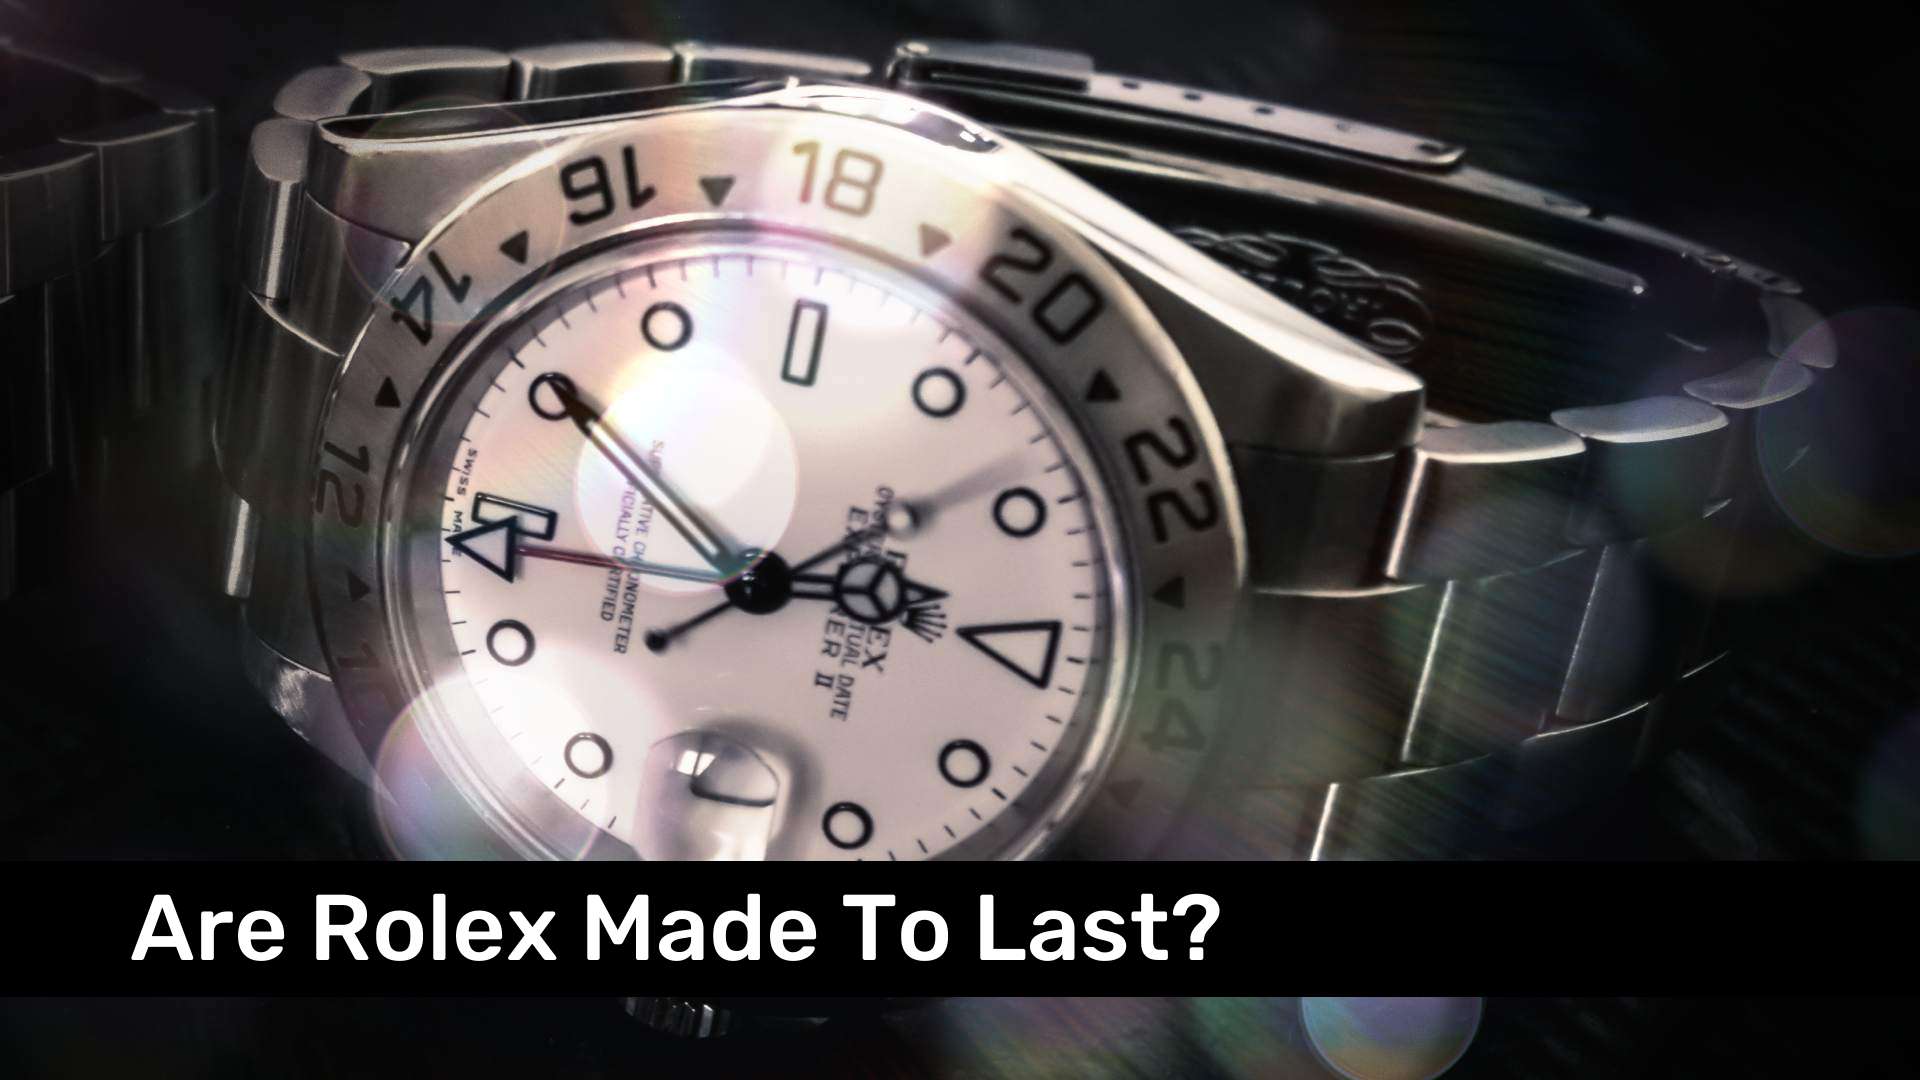 Are Rolex Made To Last?